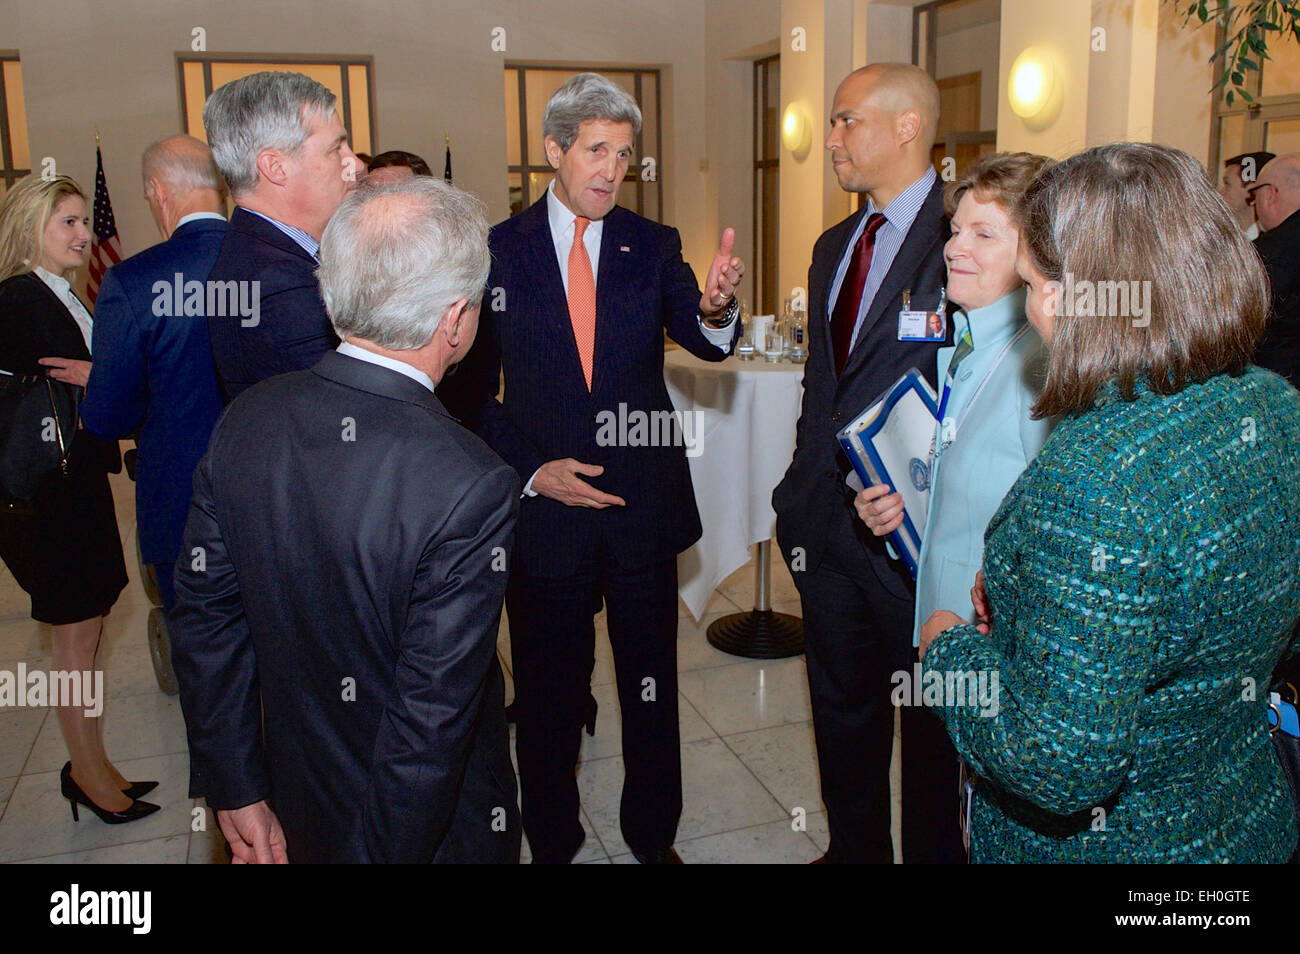 U.S. Secretary of State John Kerry speaks with, clockwise from bottom. Senator Bob Corker of Tennessee, Senator Sheldon Whitehouse of Rhode Island, Senator Cory Booker of New Jersey, Senator Jeanne Shaheen of New Hampshire, and Assistant Secretary of State for European and Eurasian Affairs Toria Nuland on February 7, 2015, in Munich, Germany, as he attends a reception given by Vice President Joe Biden for a Congressional Delegation to the Munich Security Conference. Stock Photo